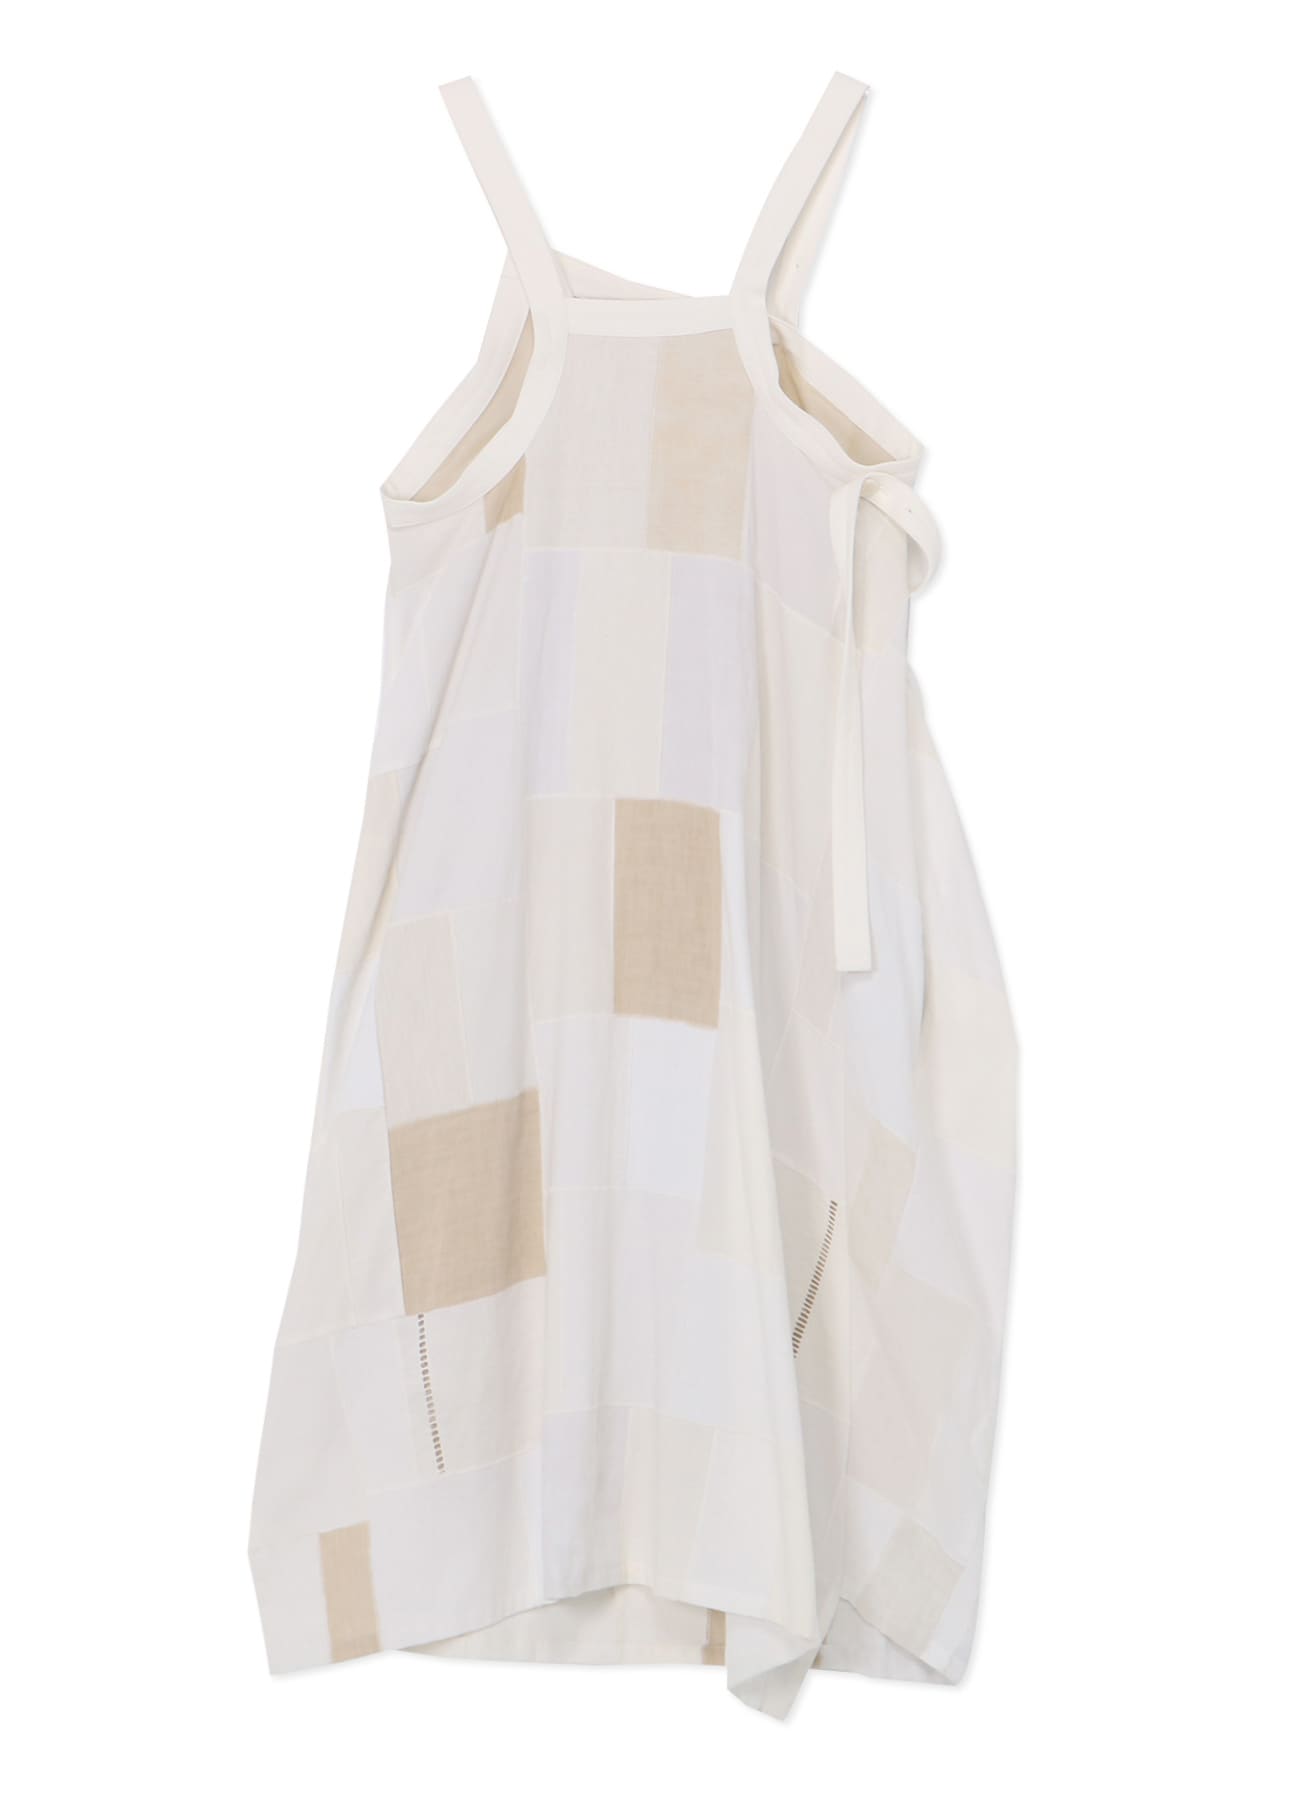 Y's KHADI COLLECTION]PATCHWORK SLEEVELESS DRESS(XS White): Vintage